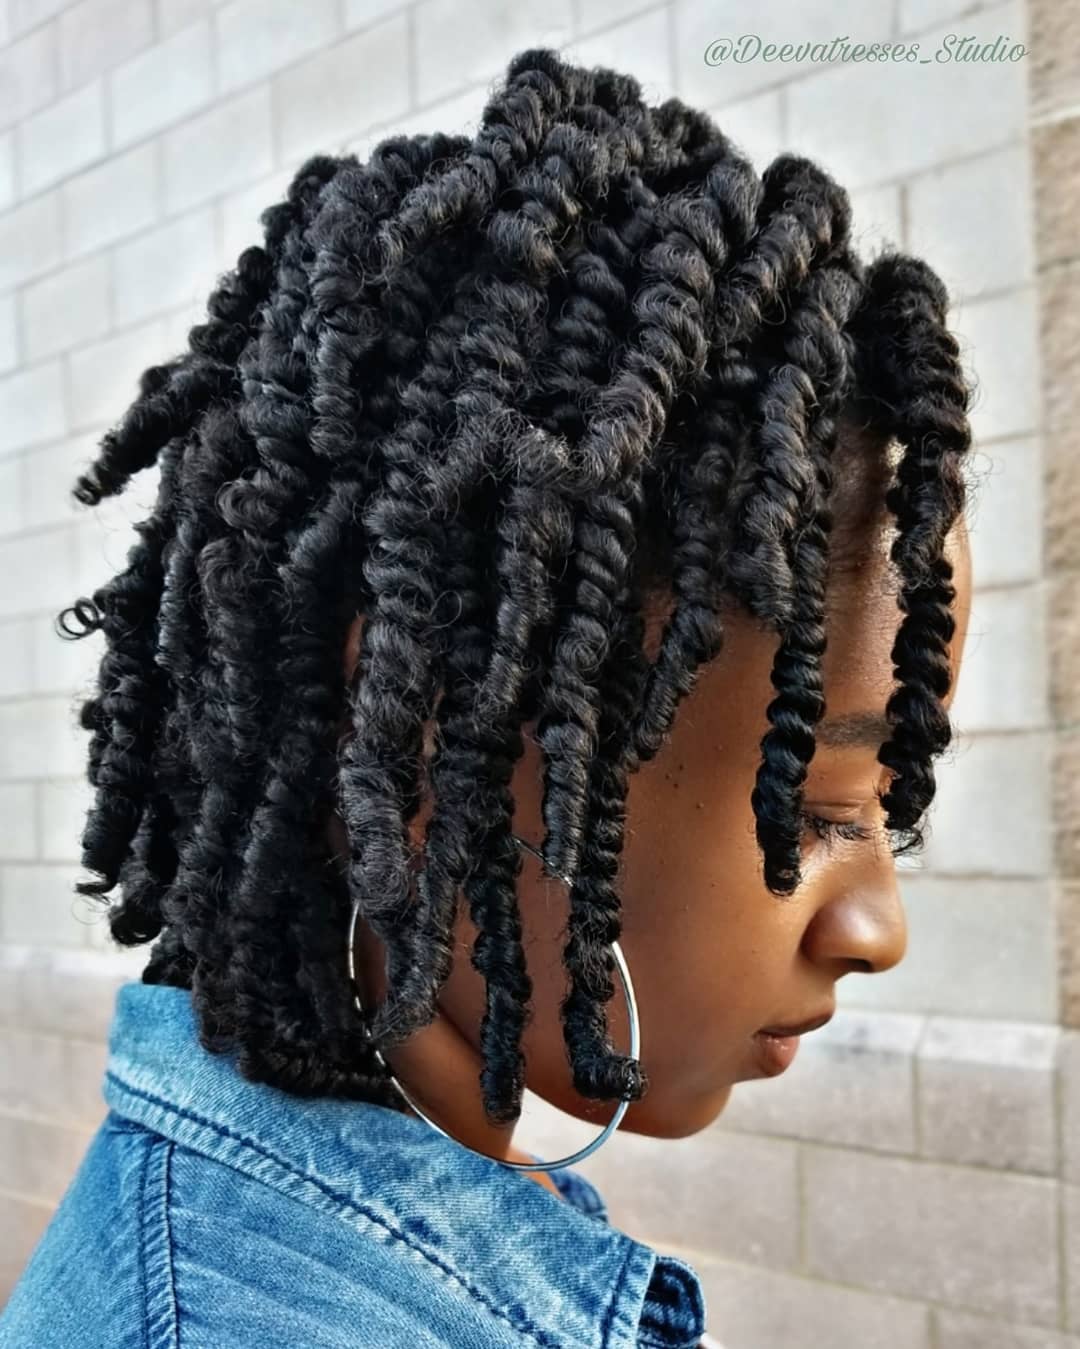 Black hairstyle protective twist braids for hair growth